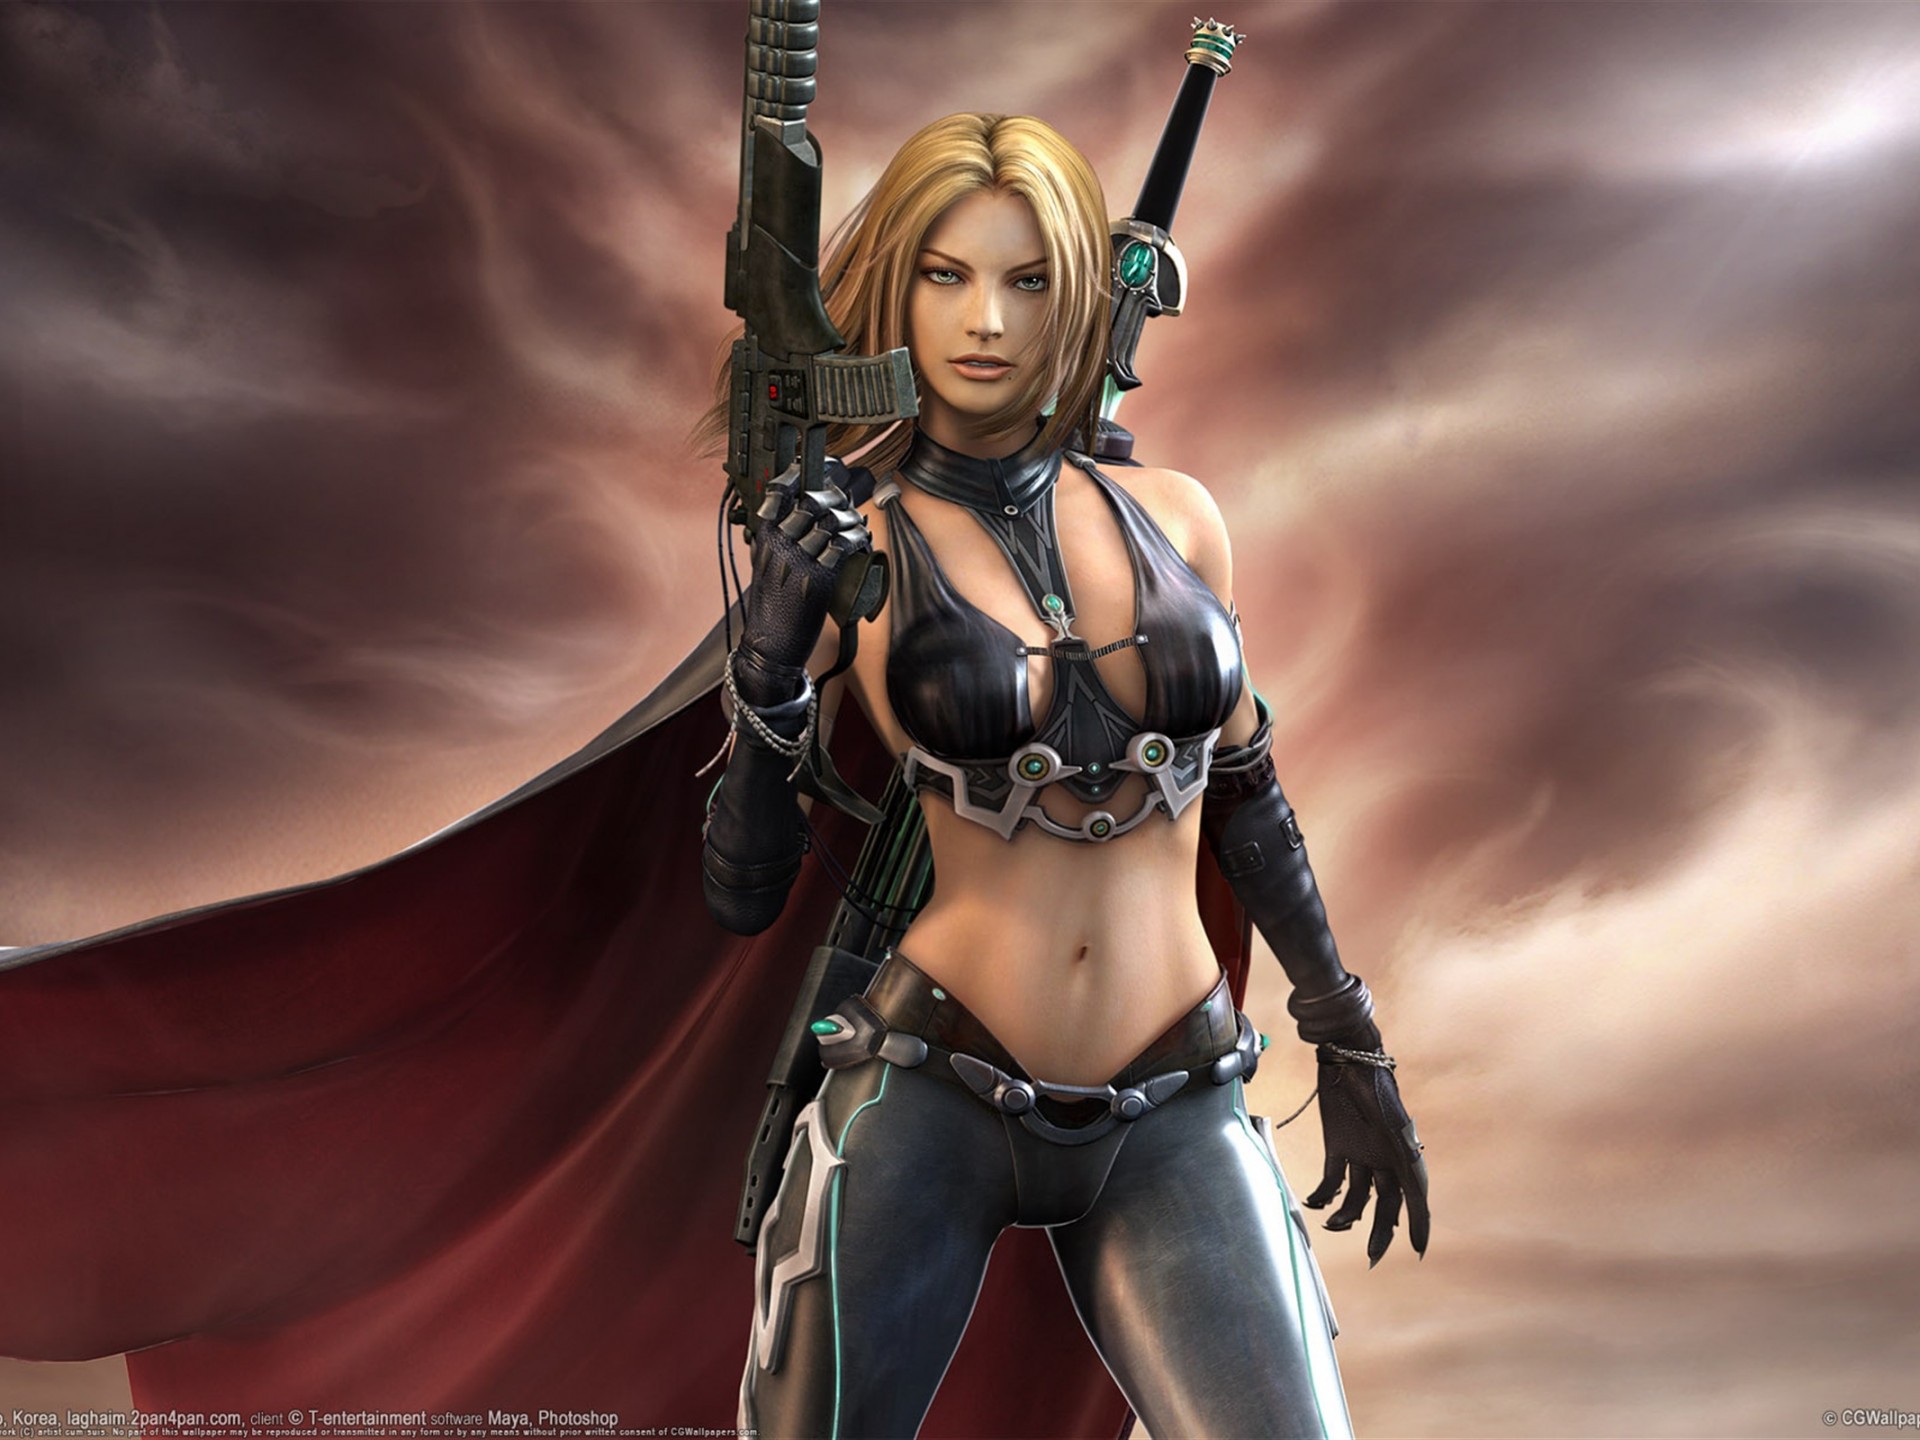 hot fantasy girl wallpaper,cg artwork,fictional character,action figure,massively multiplayer online role playing game,screenshot